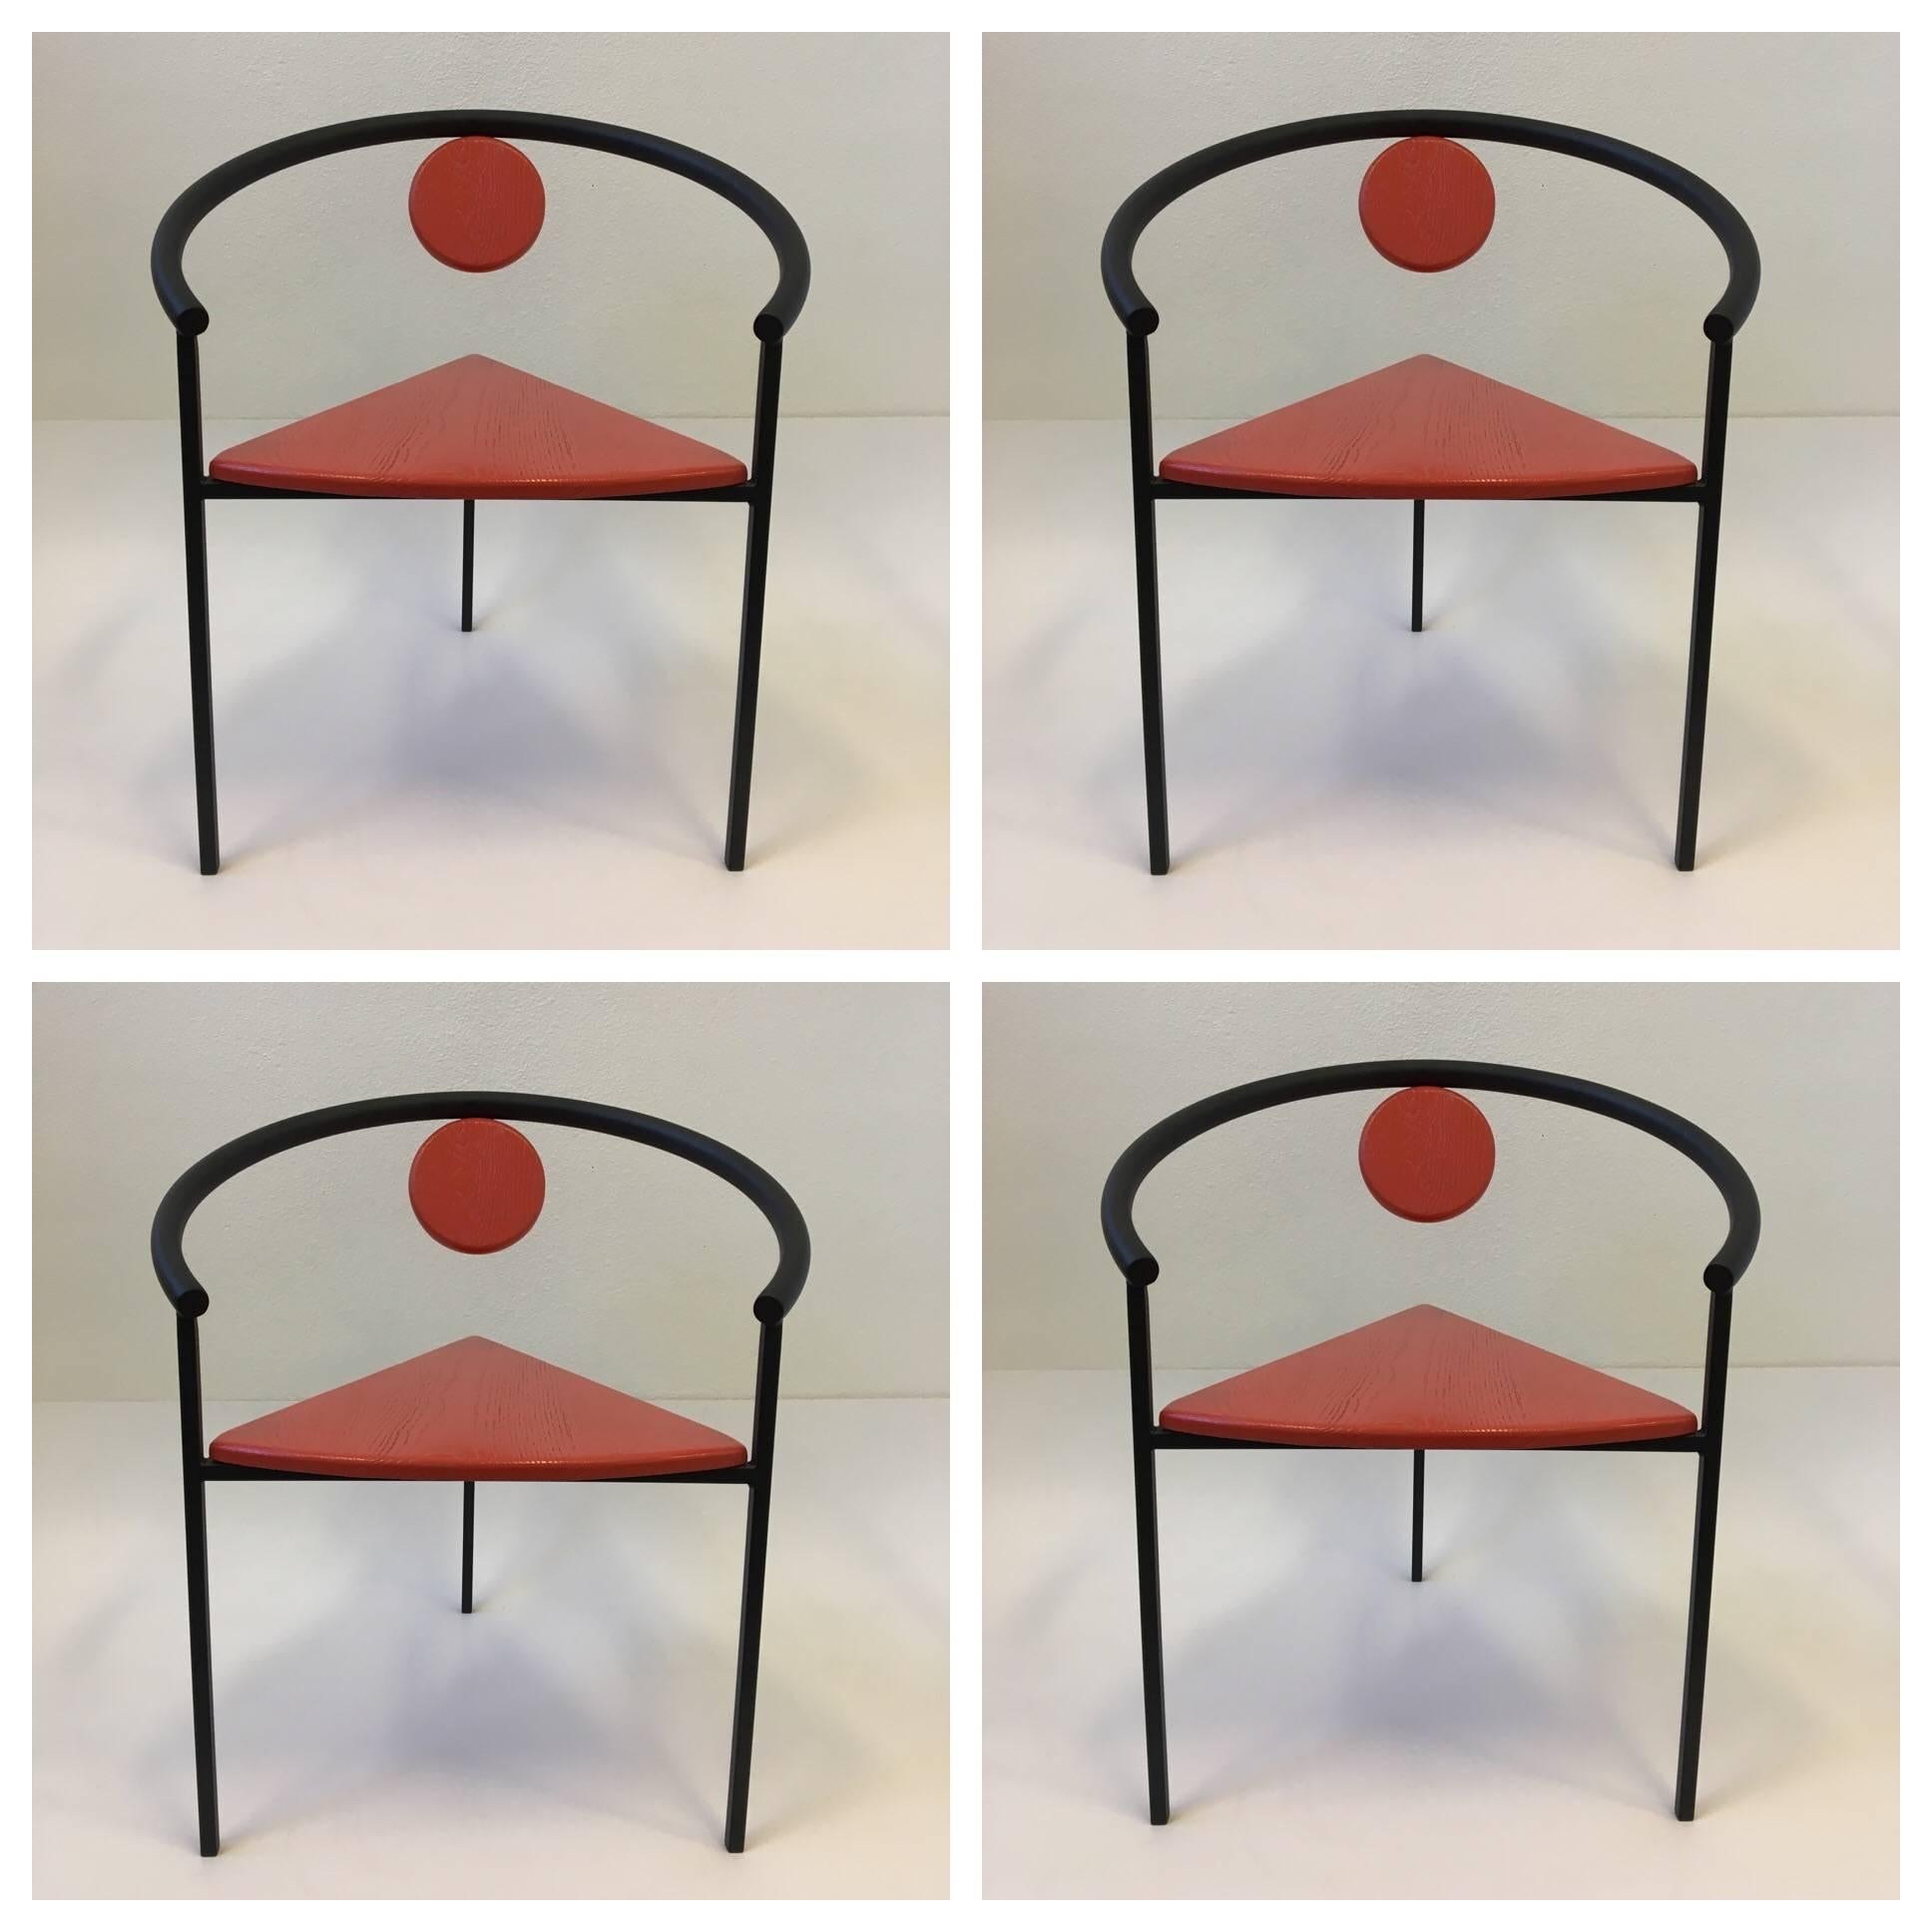 A beautiful set of four steel and wood dining chairs from the Memphis period in the manner of Italian designer Michele De Lucchi. Newly powder coated satin black and the seat and back wood rest is newly lacquered in a red orange color. (see detail